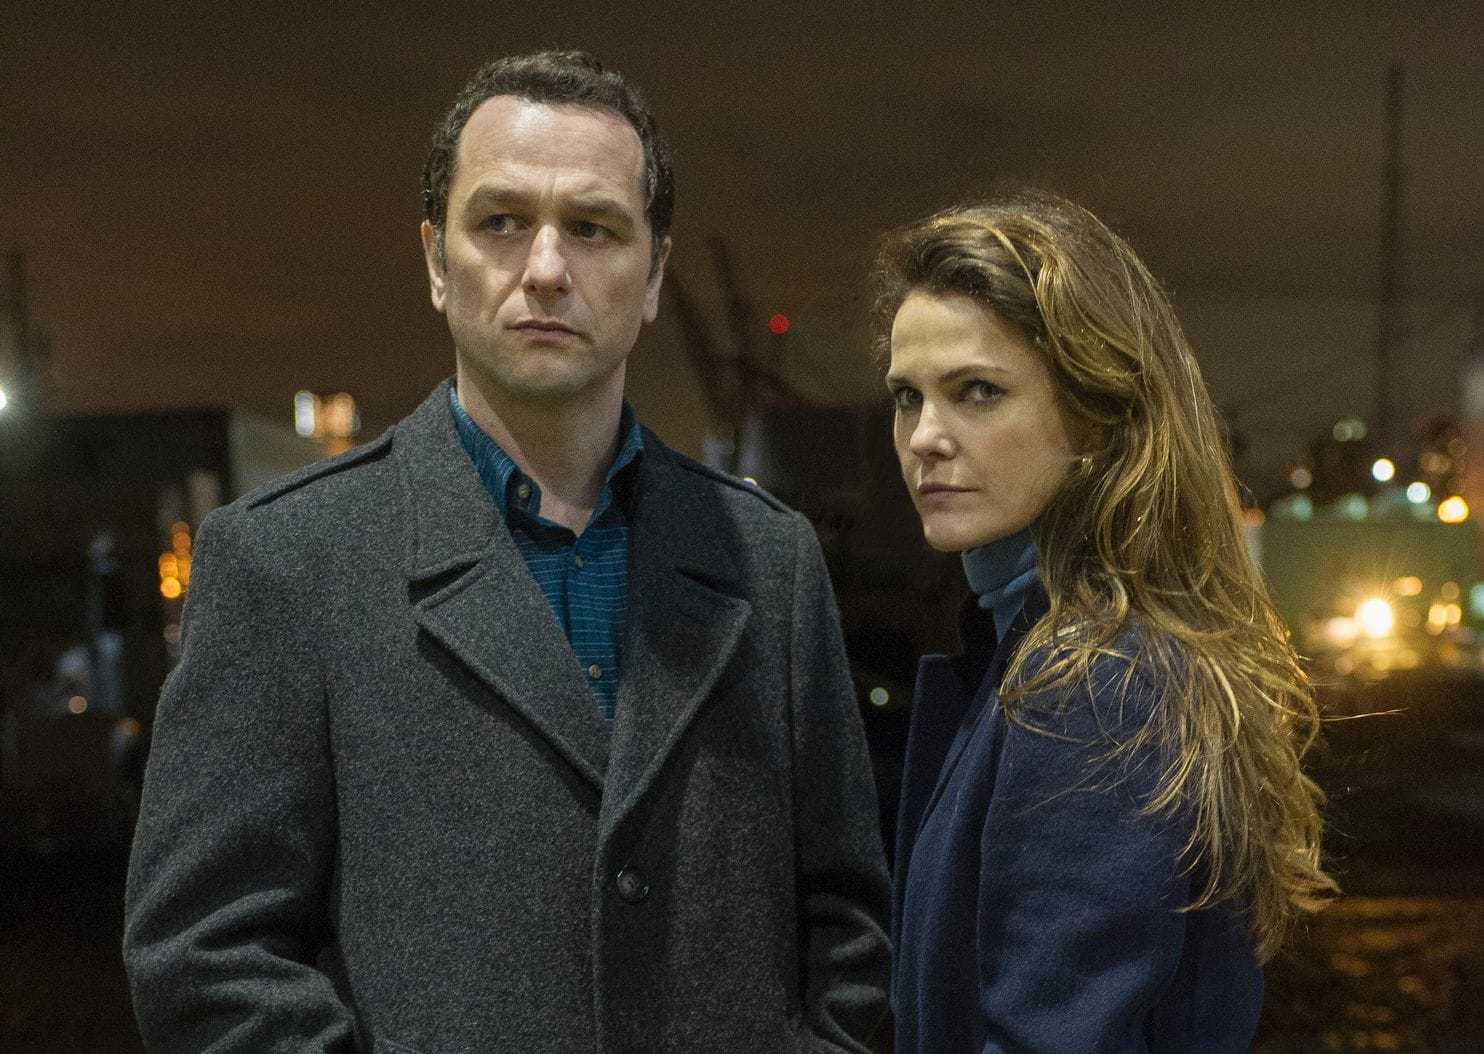 Matthew Rhys and Keri Russell as Philip and Elizabeth Jennings in 